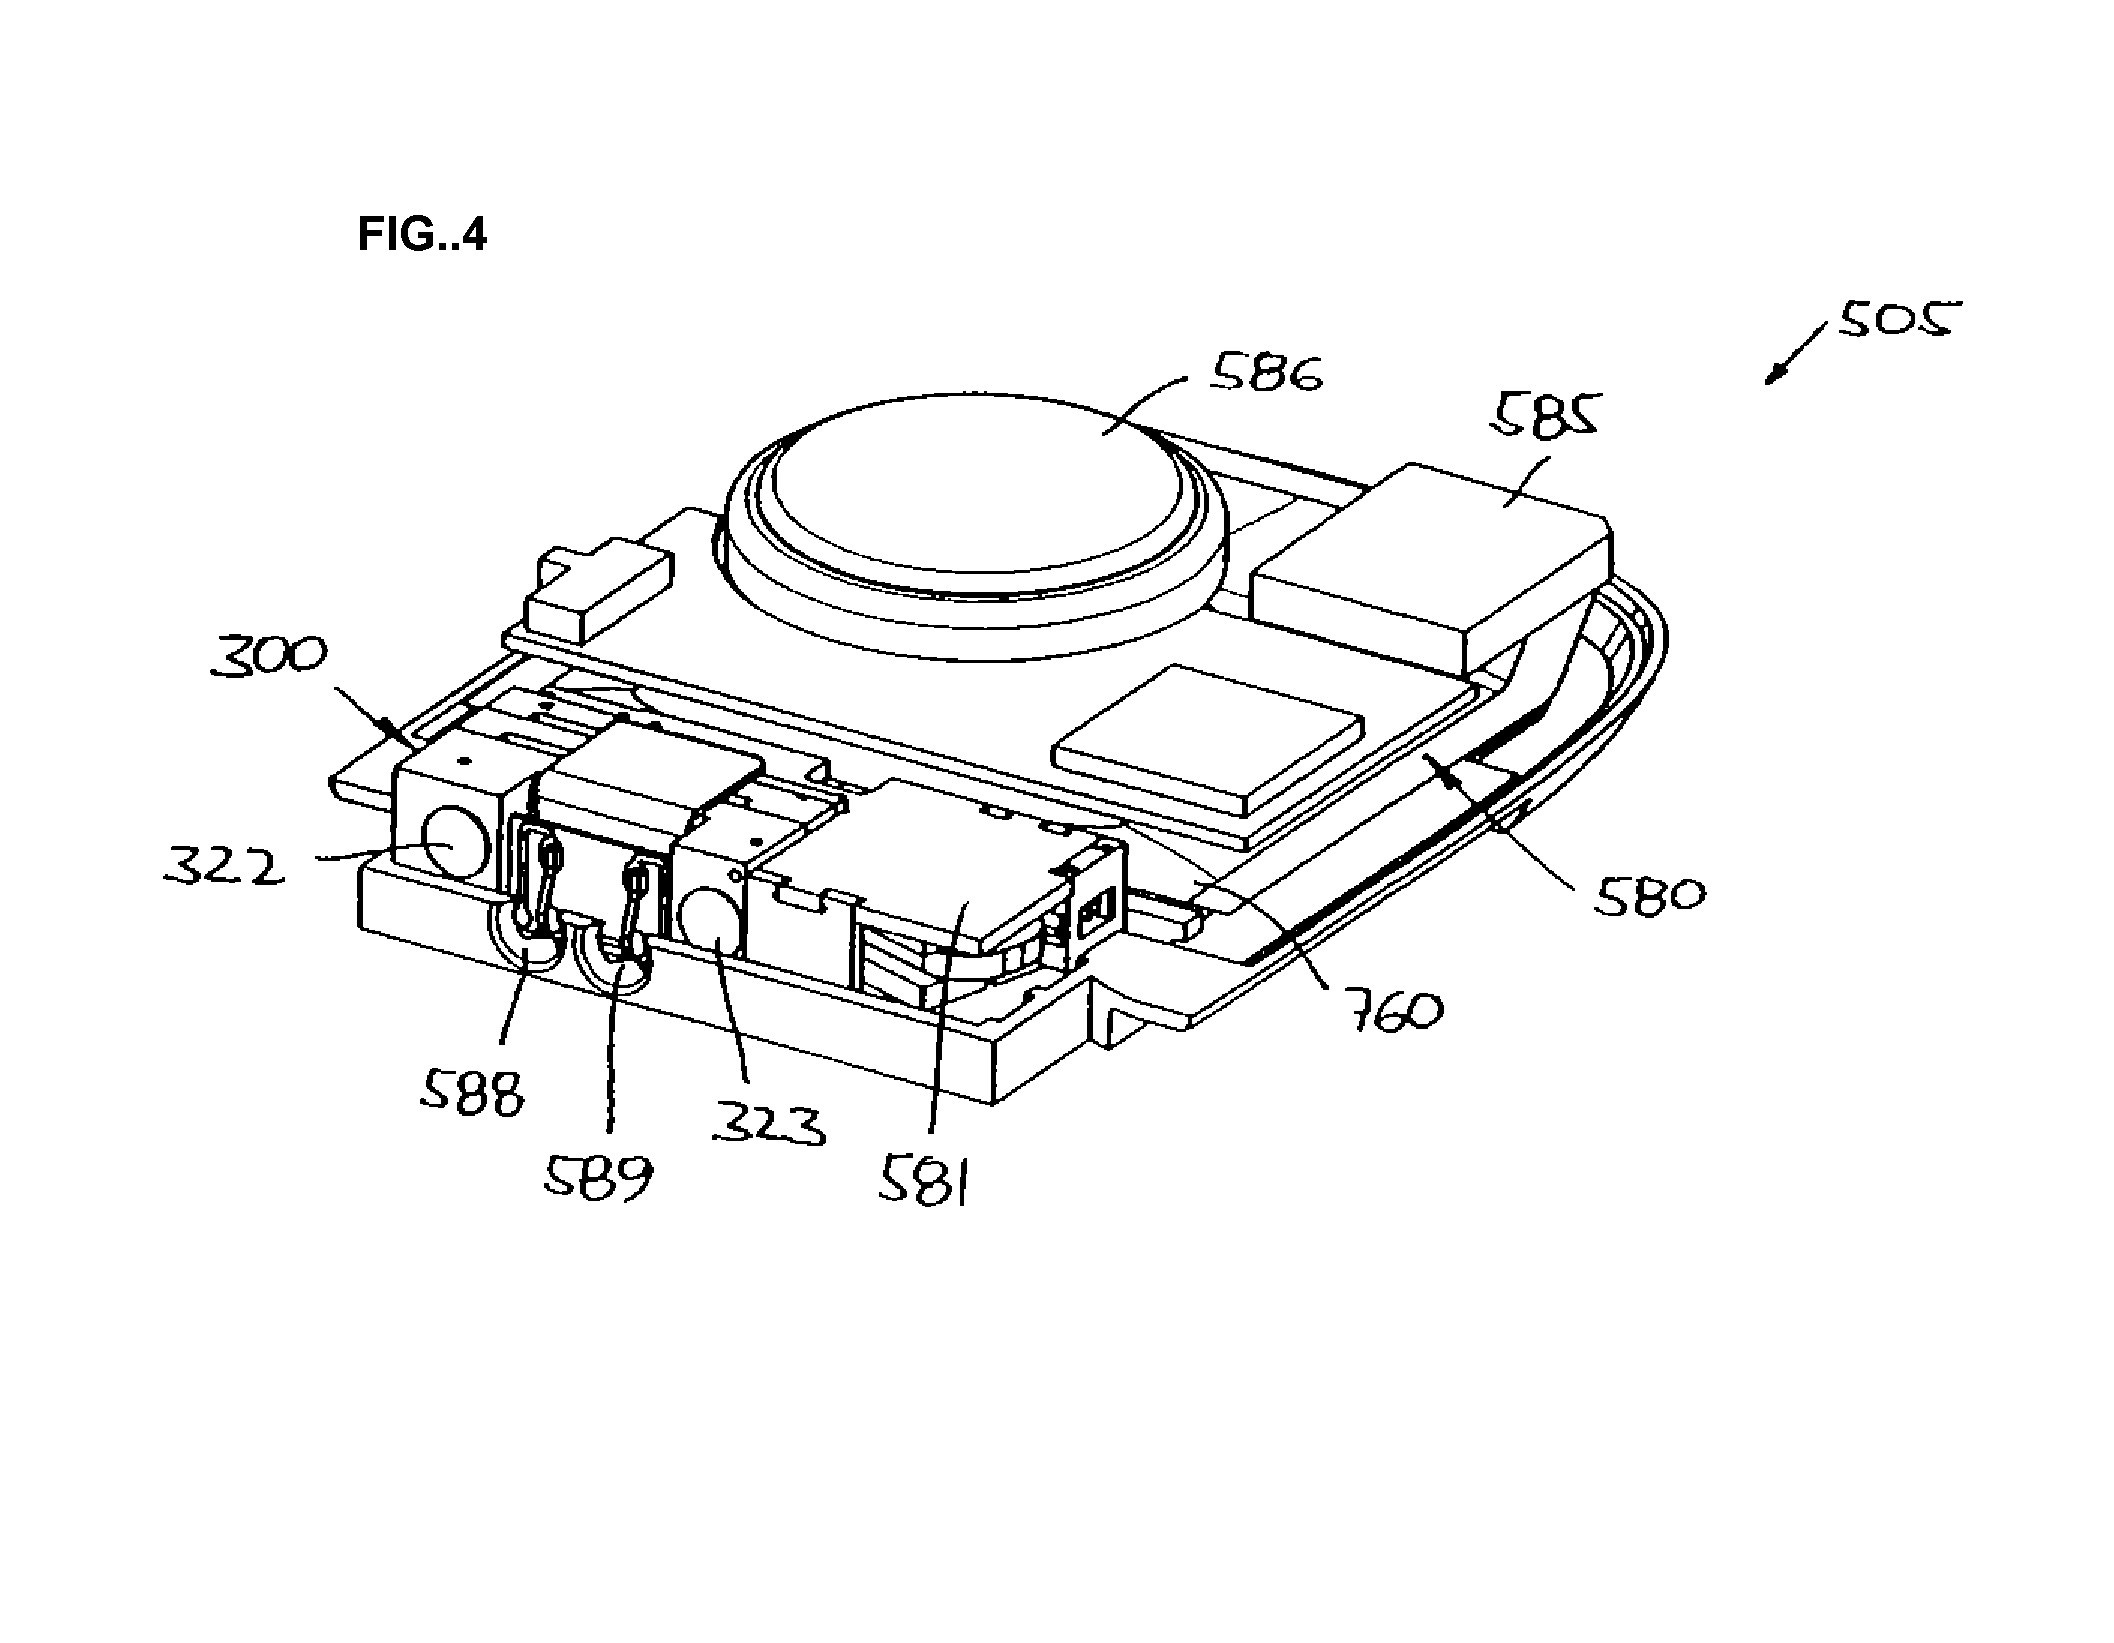 Device for Providing a Change in a Drug Delivery Rate